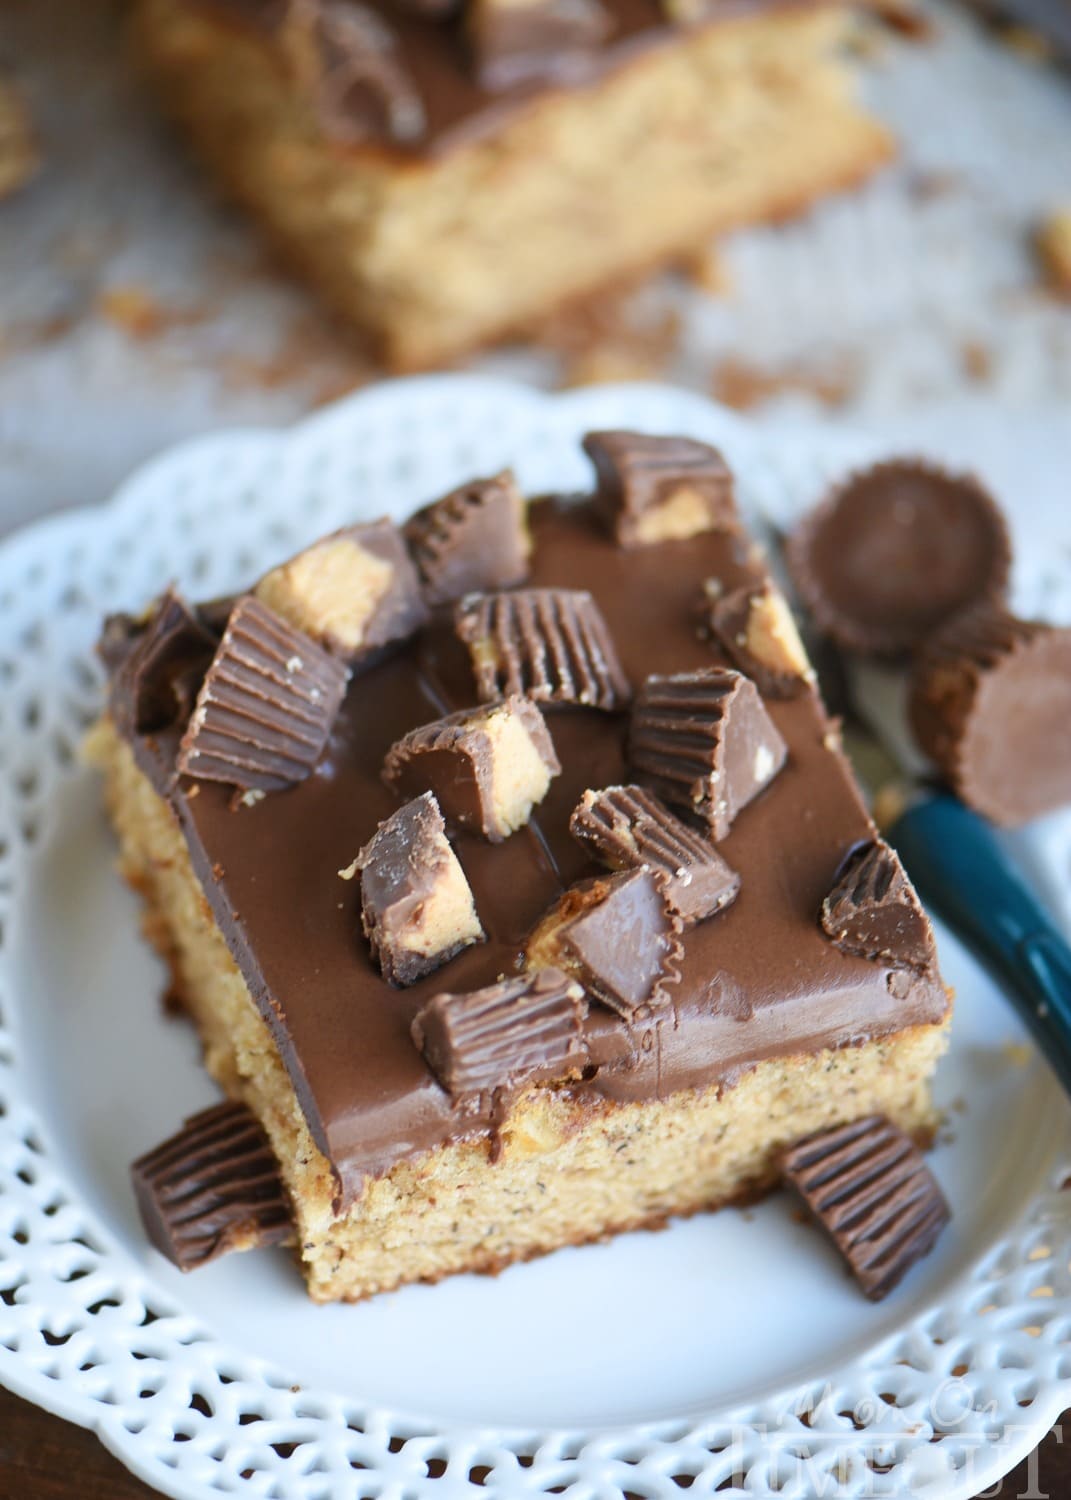 This easy Peanut Butter Banana Cake is topped with a peanut butter chocolate glaze and Reese's candy! An easy dessert that feeds a crowd! Great for parties and peanut butter lovers! // Mom On Timeout